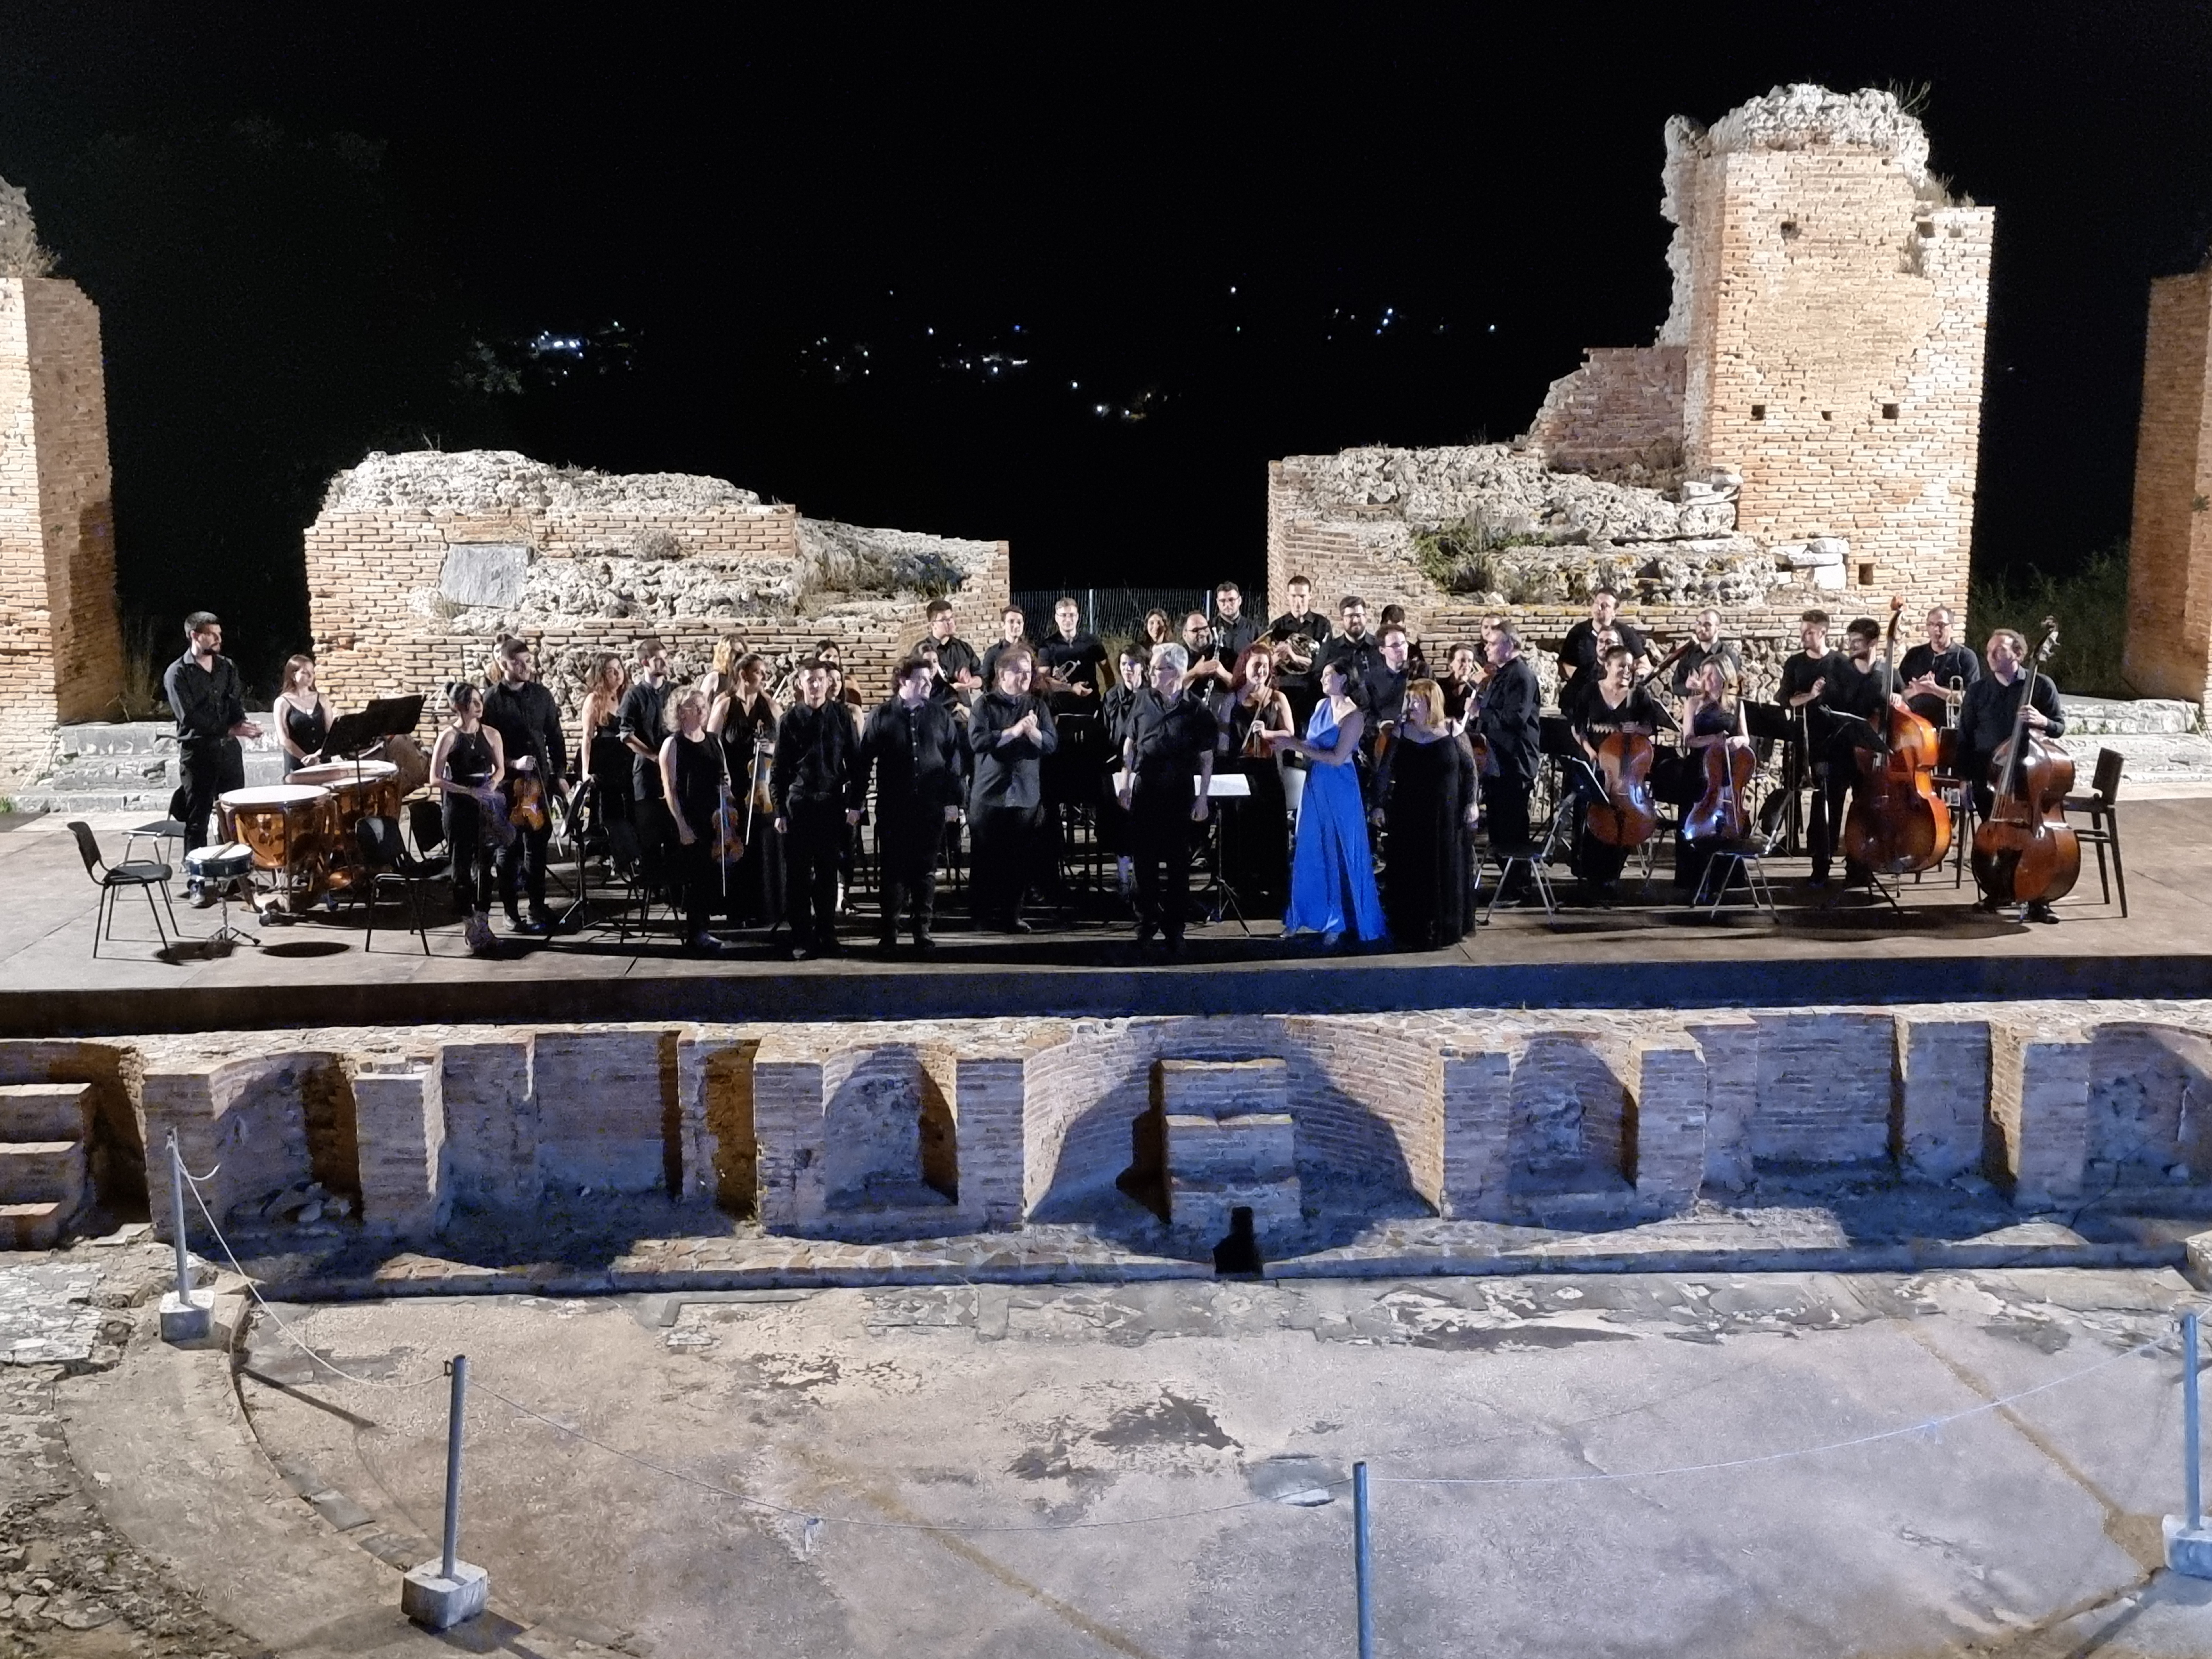 Two days of musical events with works by Greek & Italian composers in first world performance, with a view to highlighting the intercultural tradition of Arta & Puglia regions